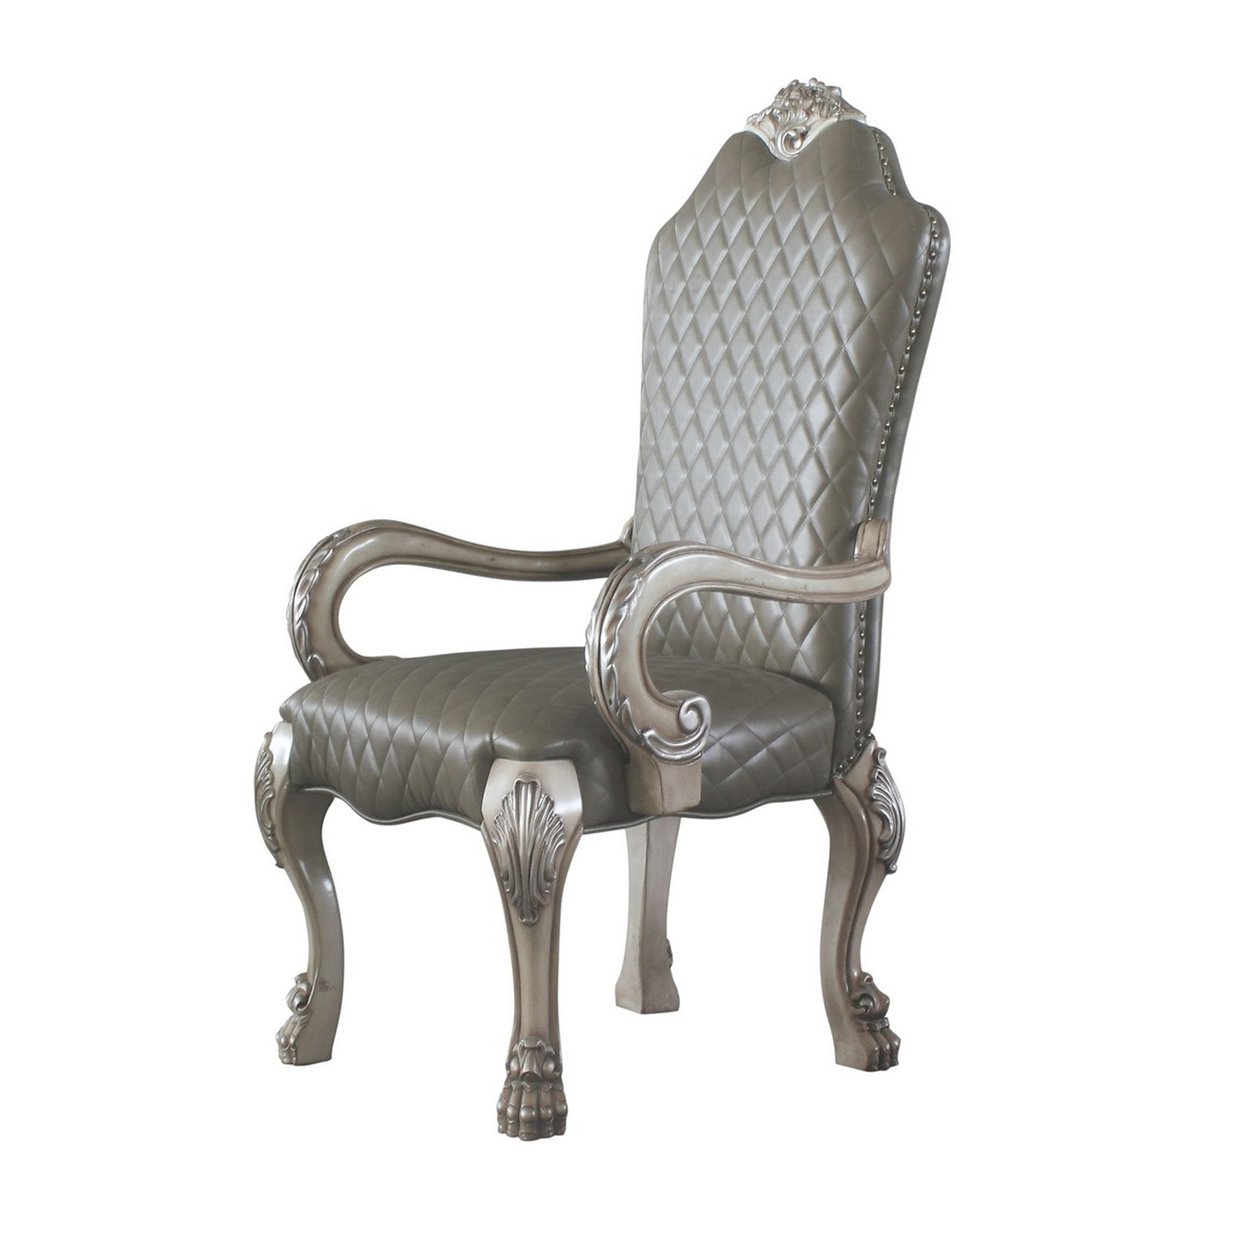 Leatherette Arm Chair With High Back And Claw Legs, Set Of 2, Antique White- Saltoro Sherpi